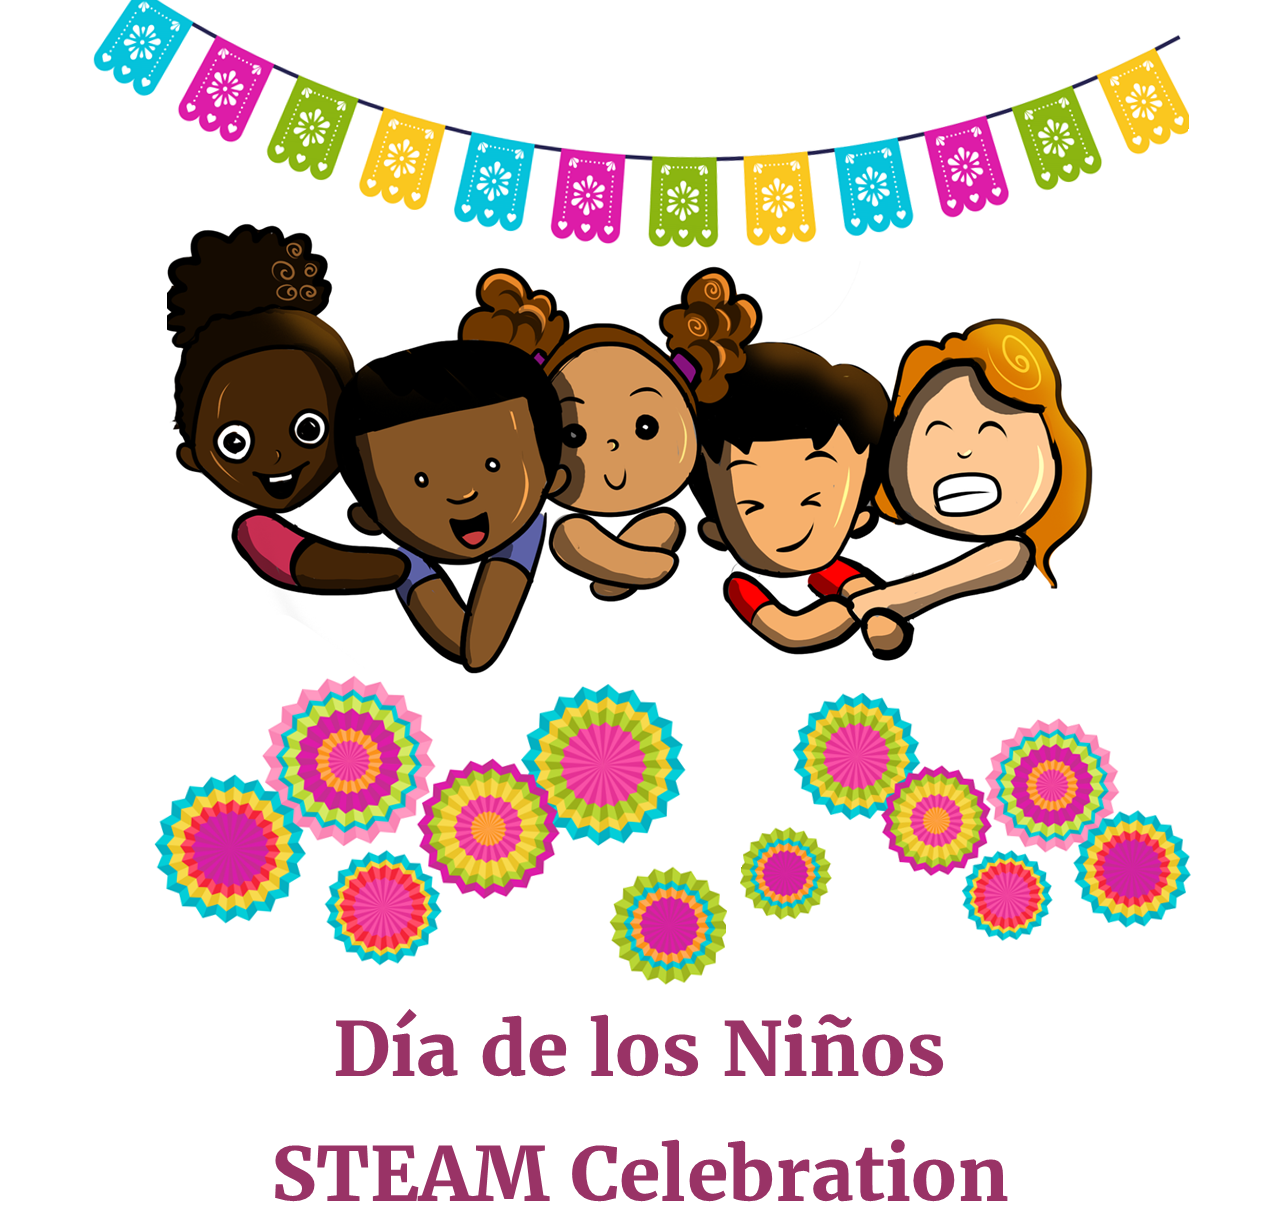 Illustrations of diverse children with papel picado and text that says "Dia de los Ninos STEAM Celebration"